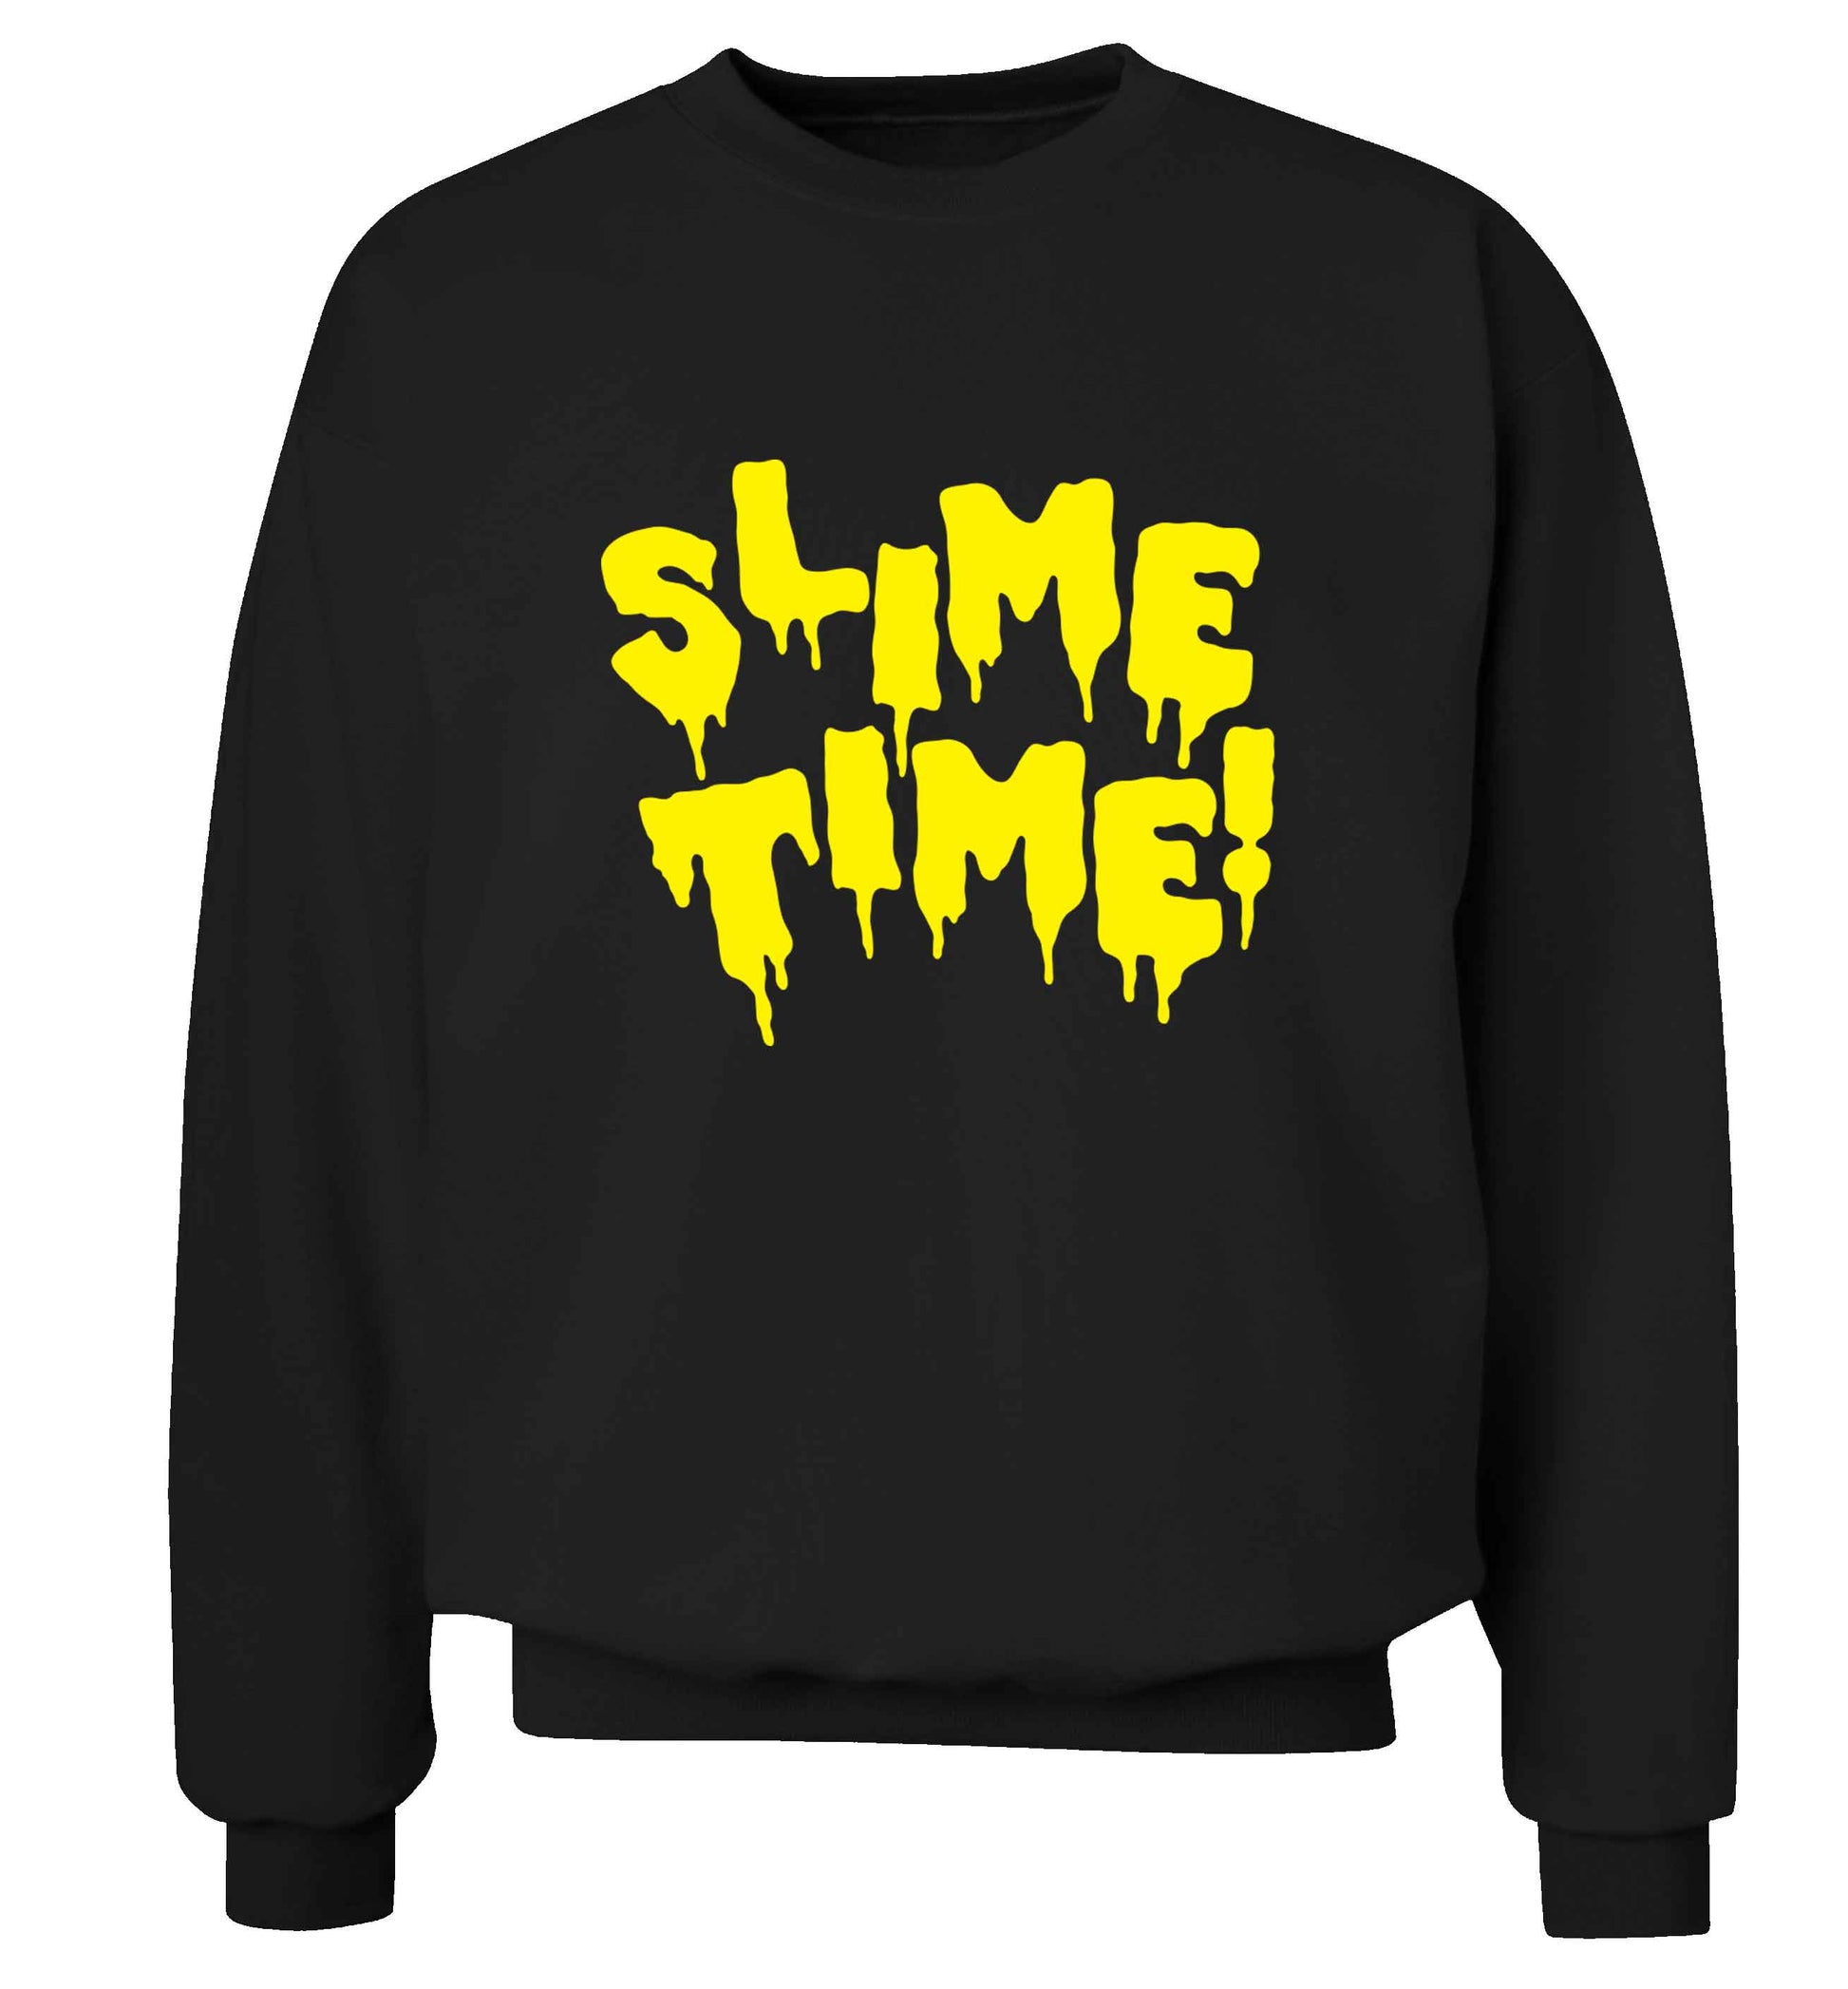 Neon yellow slime time adult's unisex black sweater 2XL